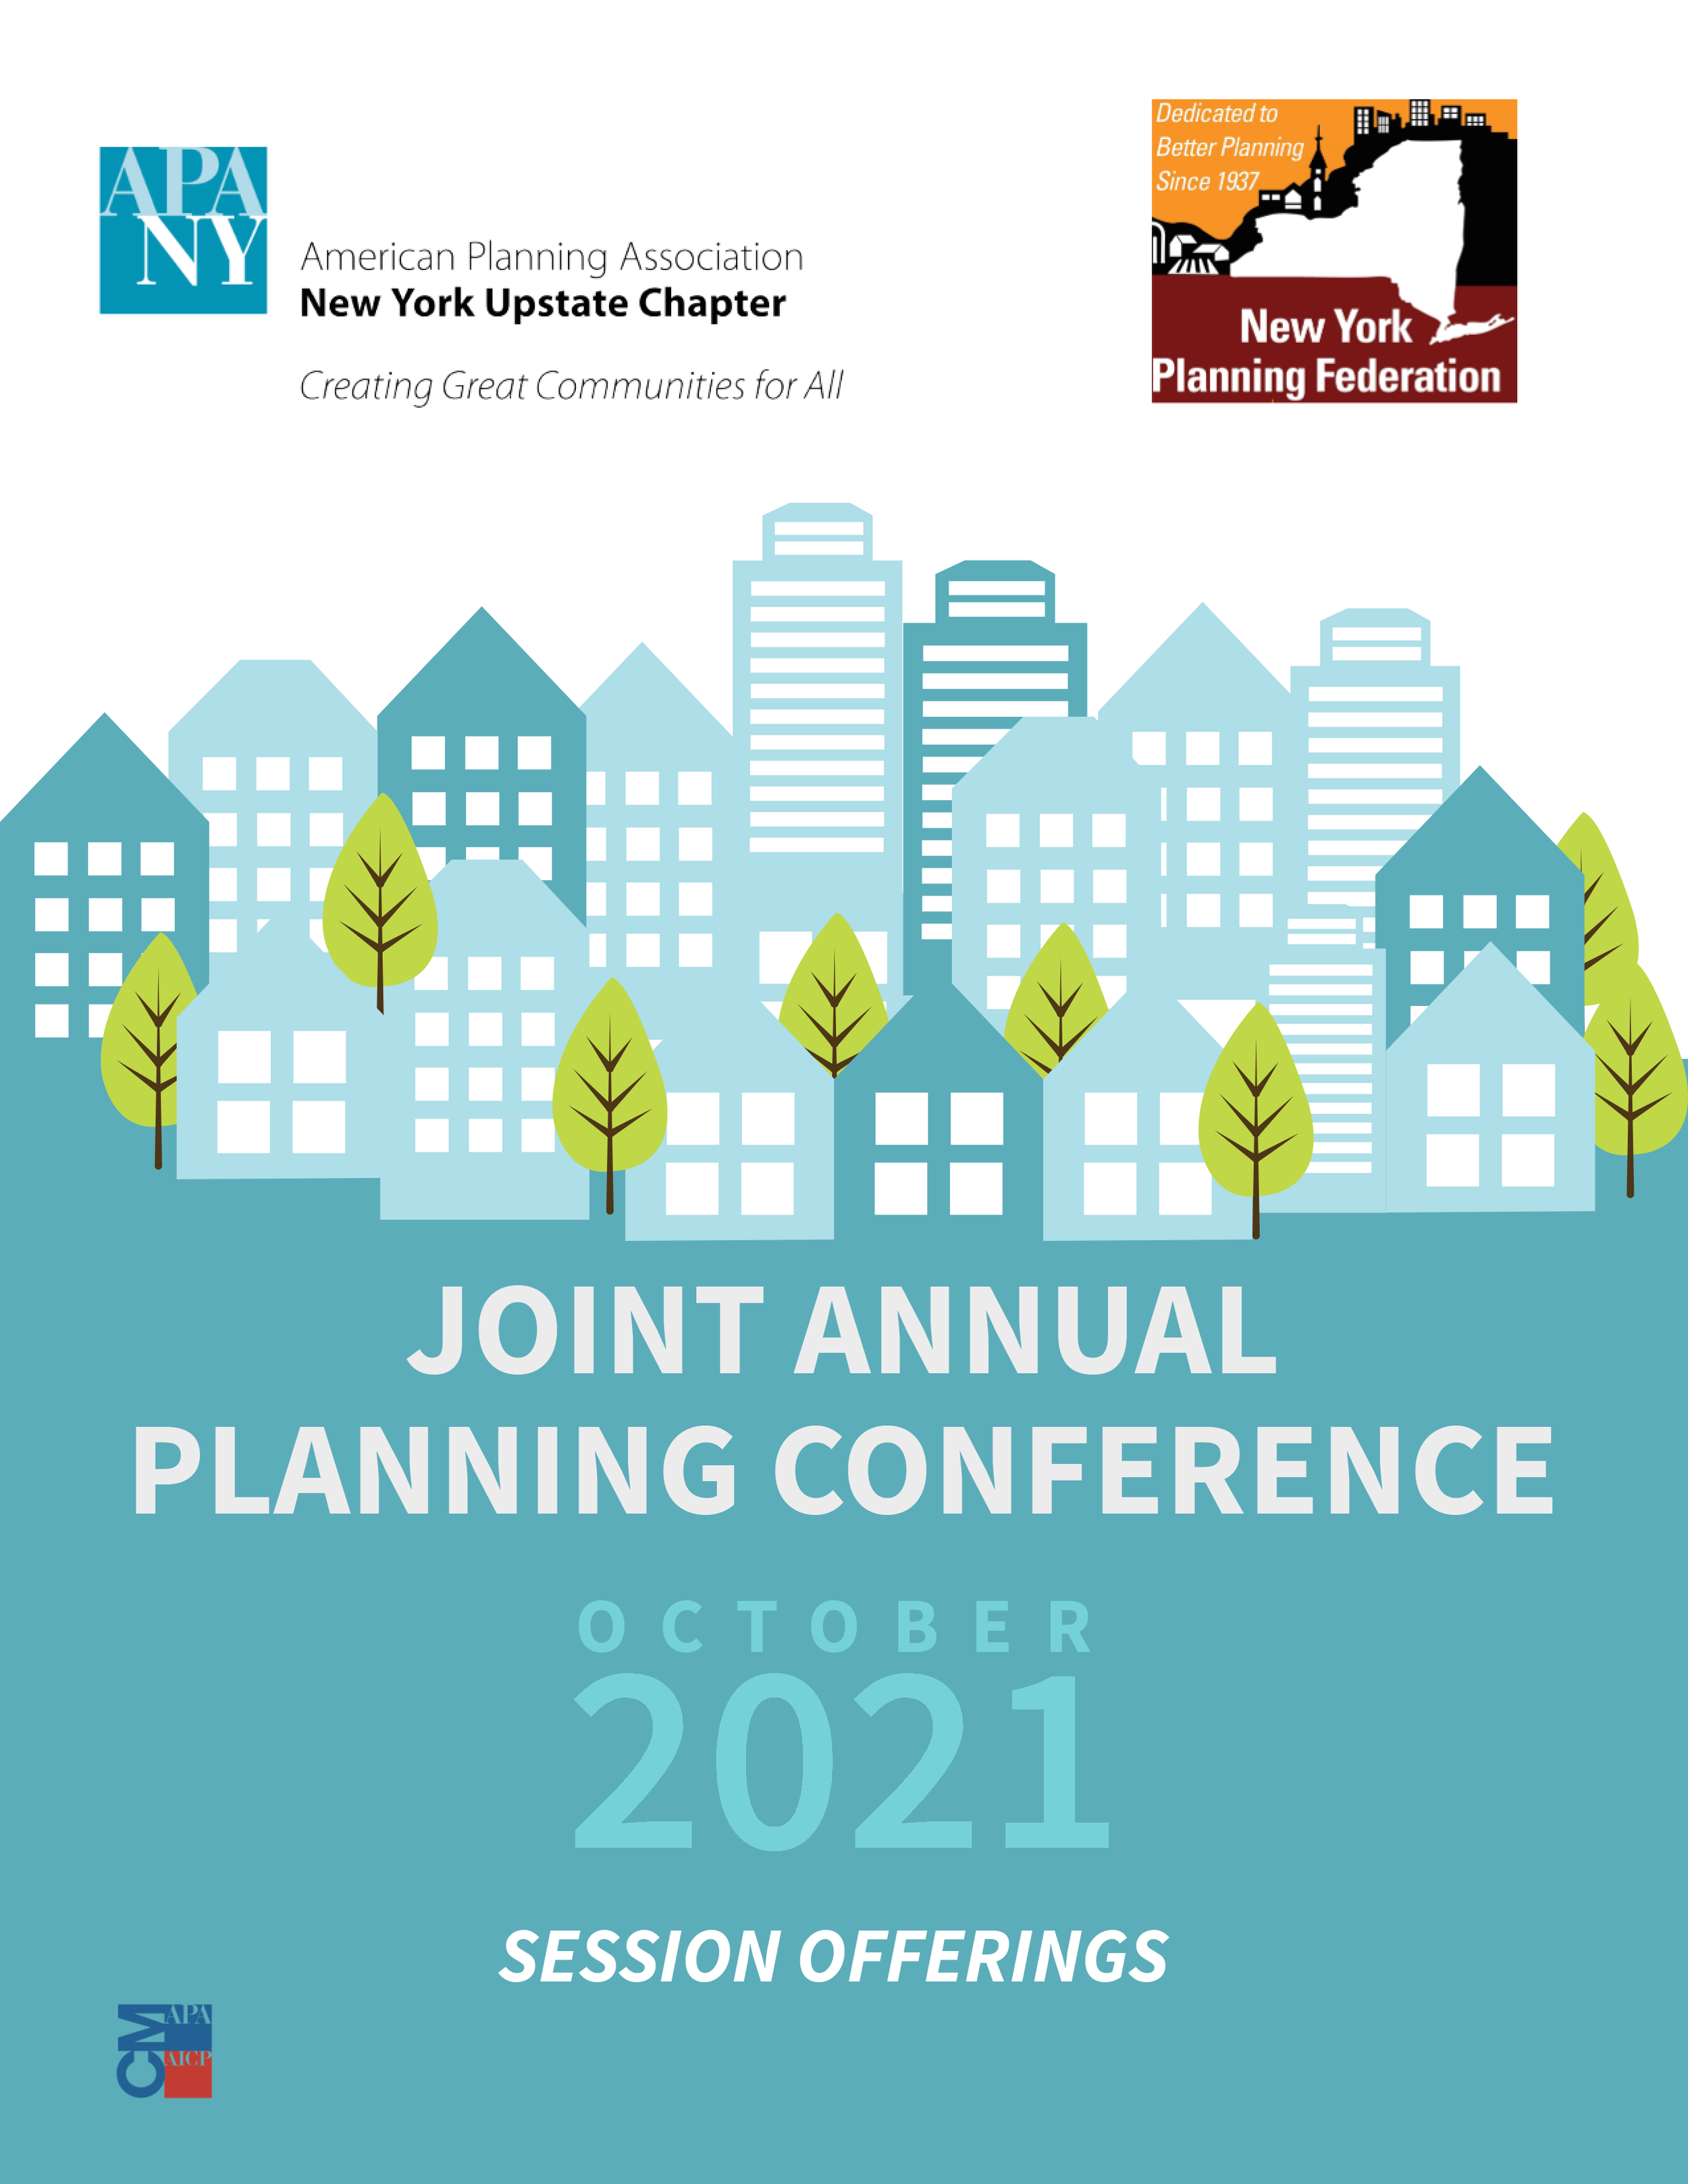 APA NY 2021 Joint Annual Planning Conference — New York Upstate